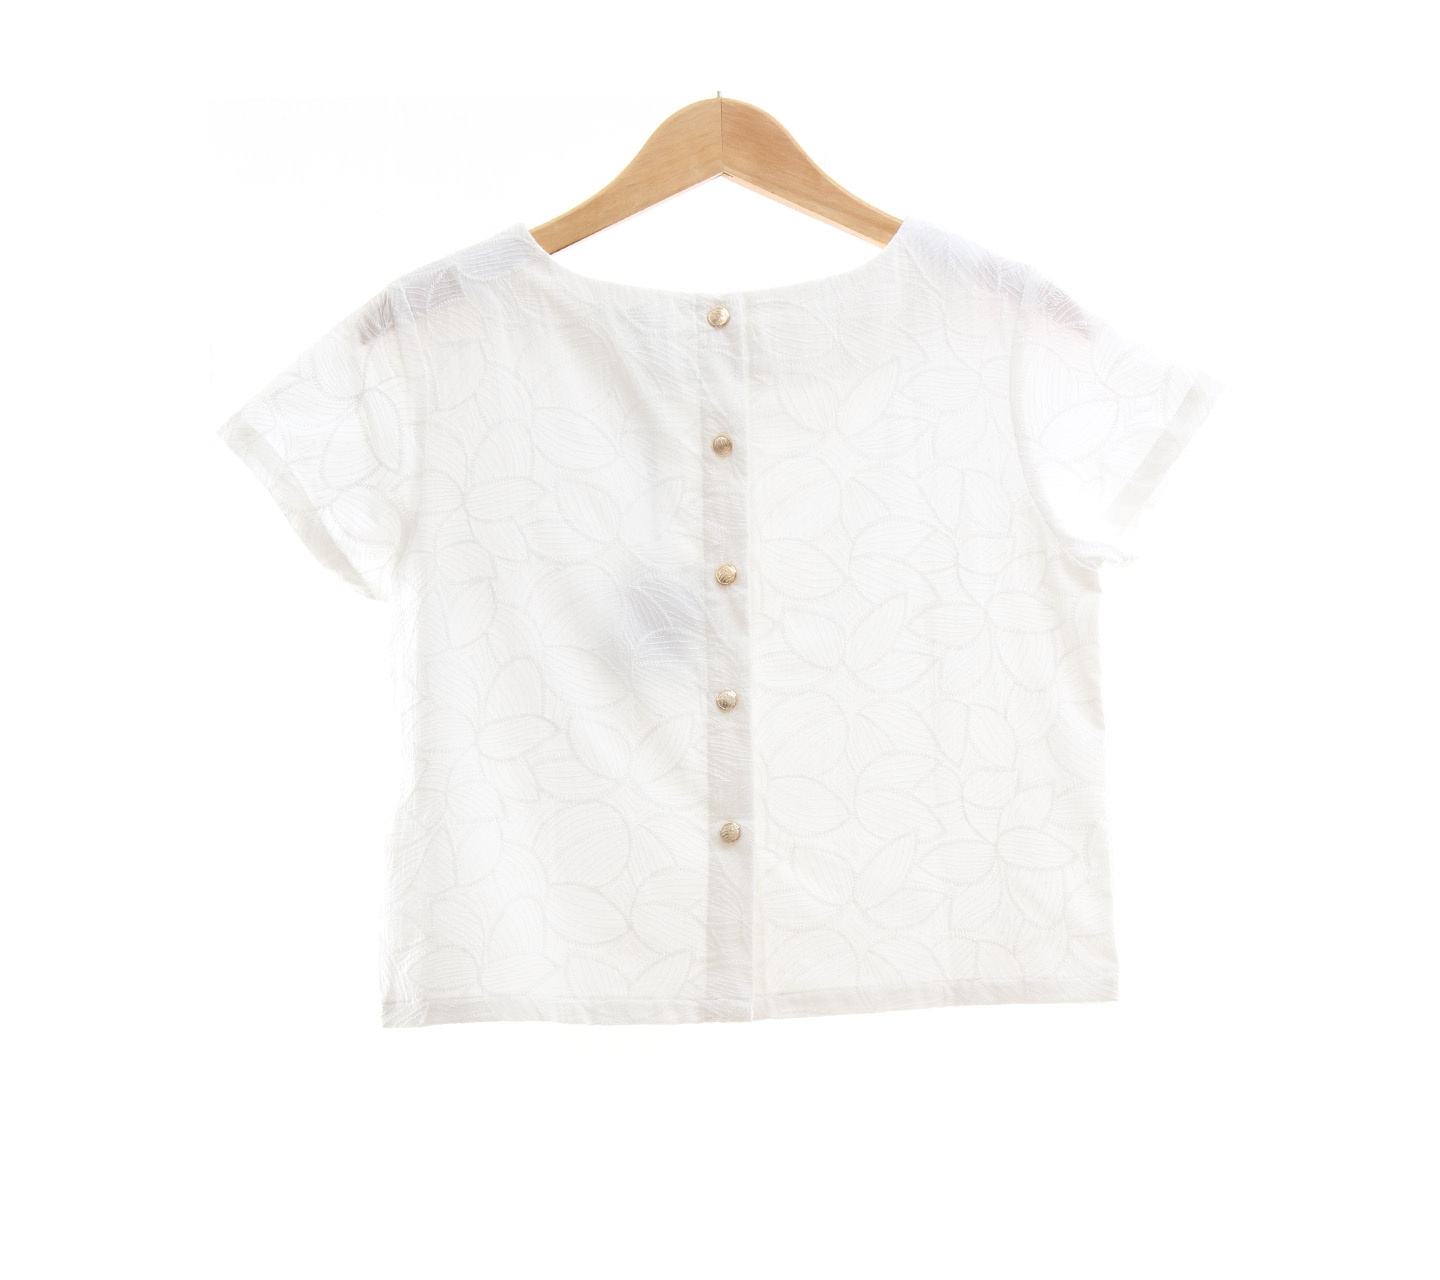 Dot Dtails Patterned White Blouse